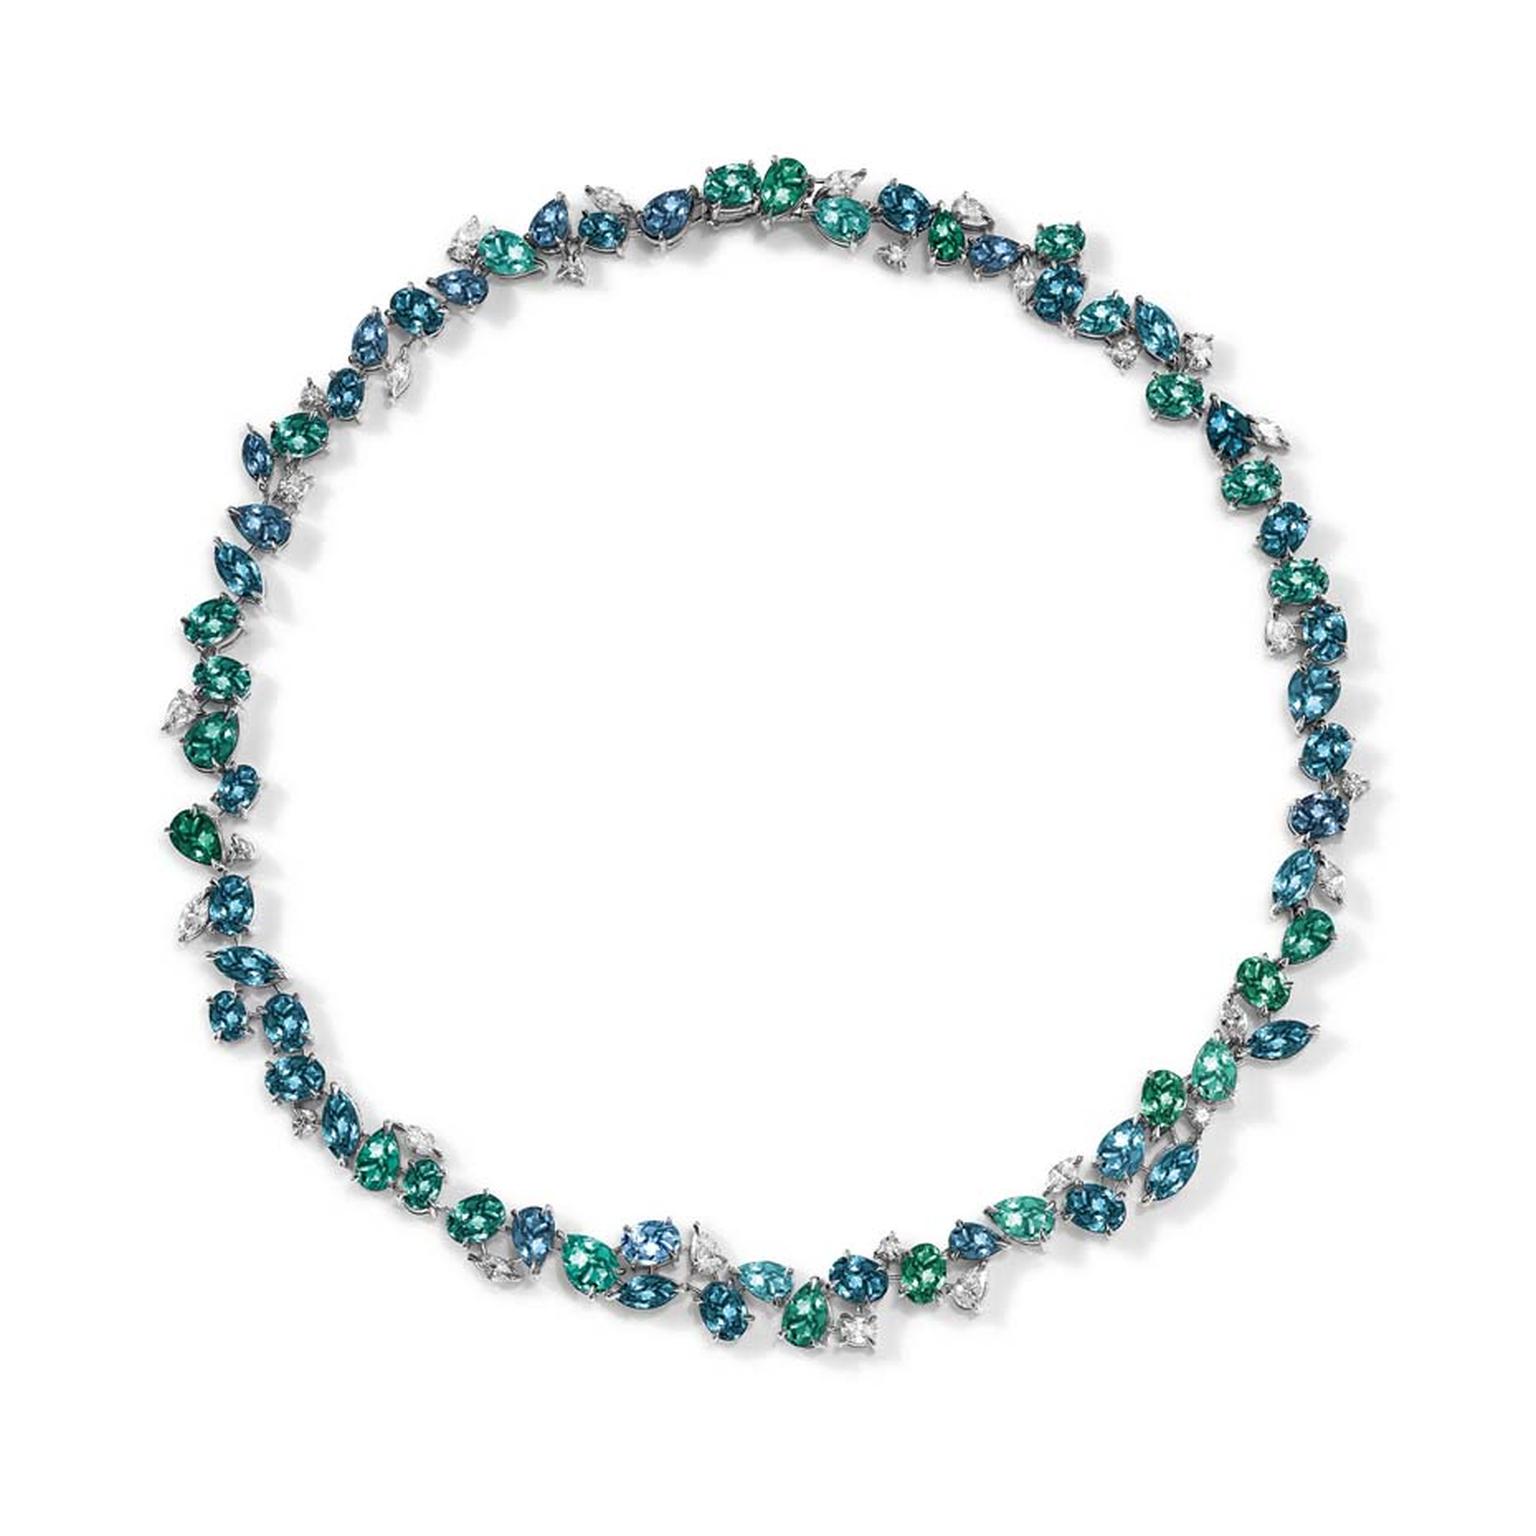 Asprey Chaos collection platinum necklace with mixed-cut tourmalines and diamonds.